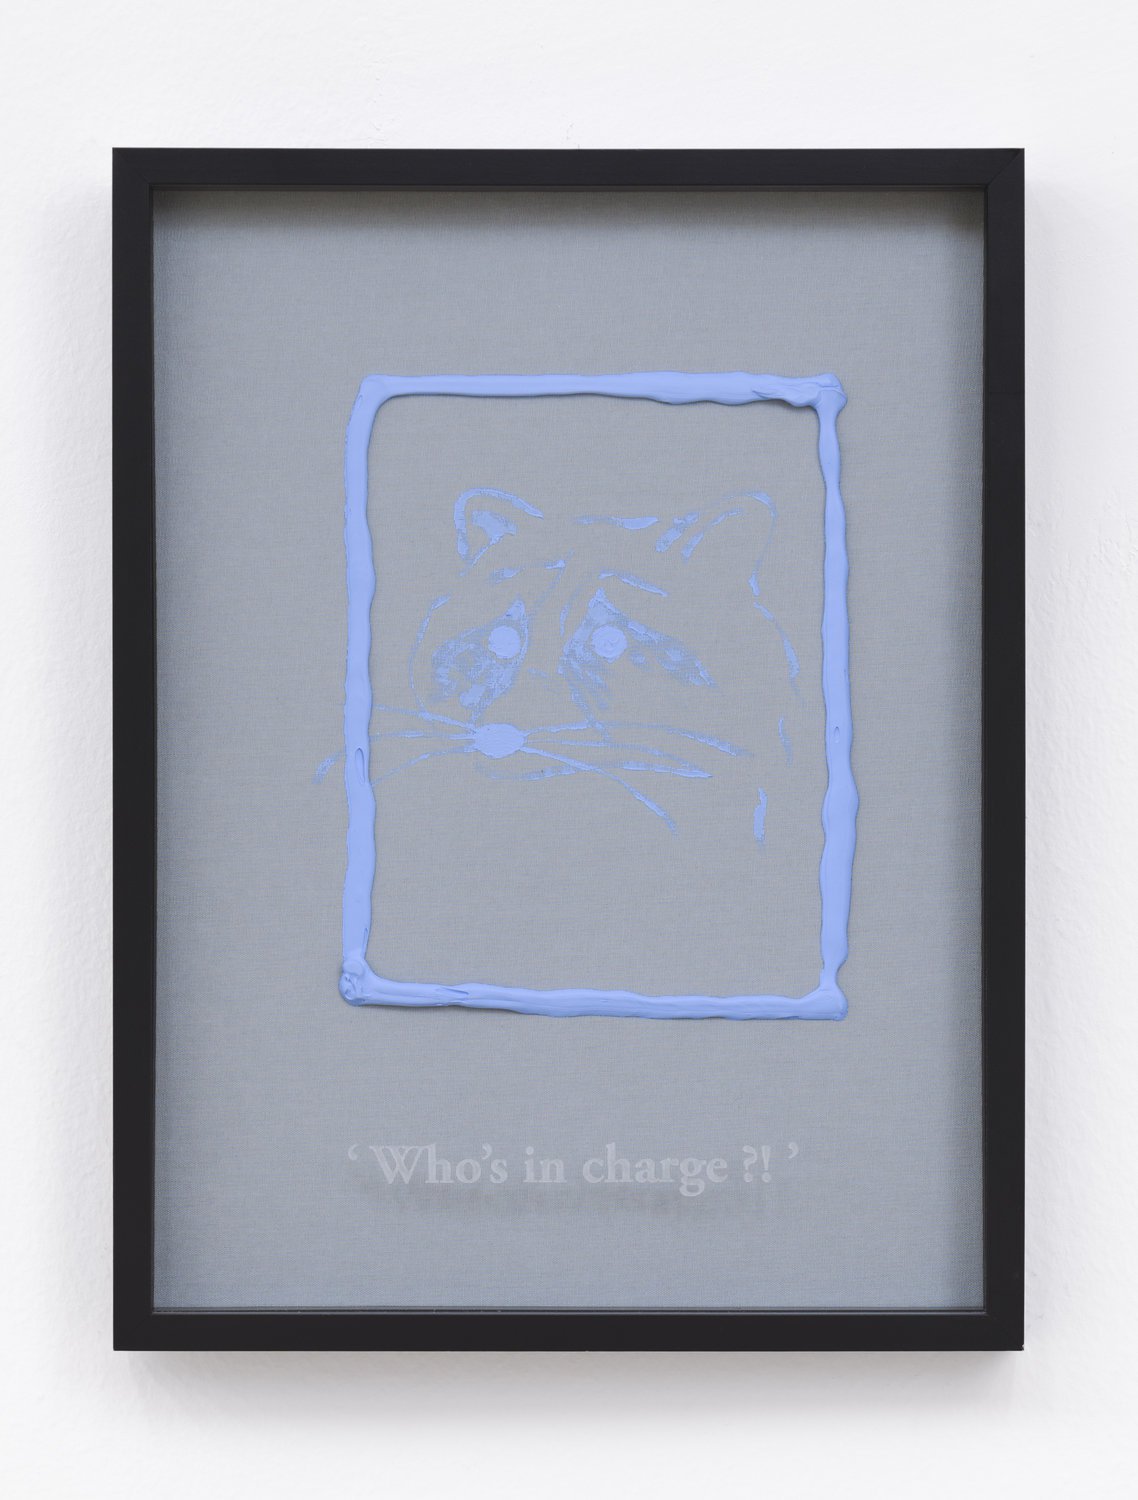 Philipp Timischl&quot;Who&#x27;s in charge?!&quot; (Light Grey/Royal Blue Light), 2017Acrylic on linen and glass-engraved object frame40.1 x 32.1 cm, unique